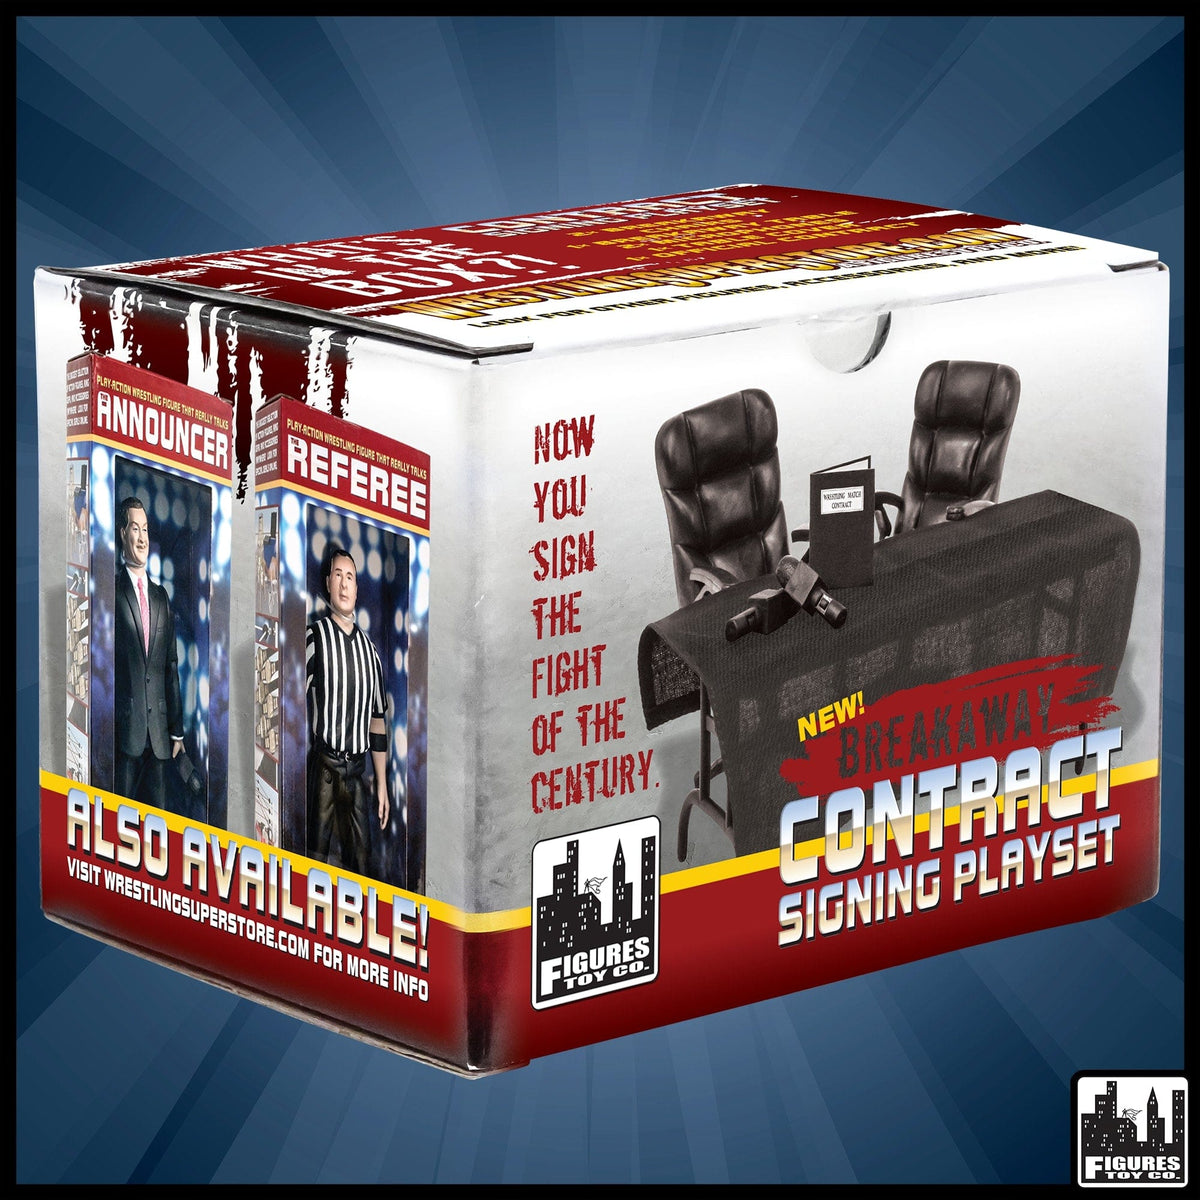 Breakable Contract Signing Playset for WWE Wrestling Action Figures